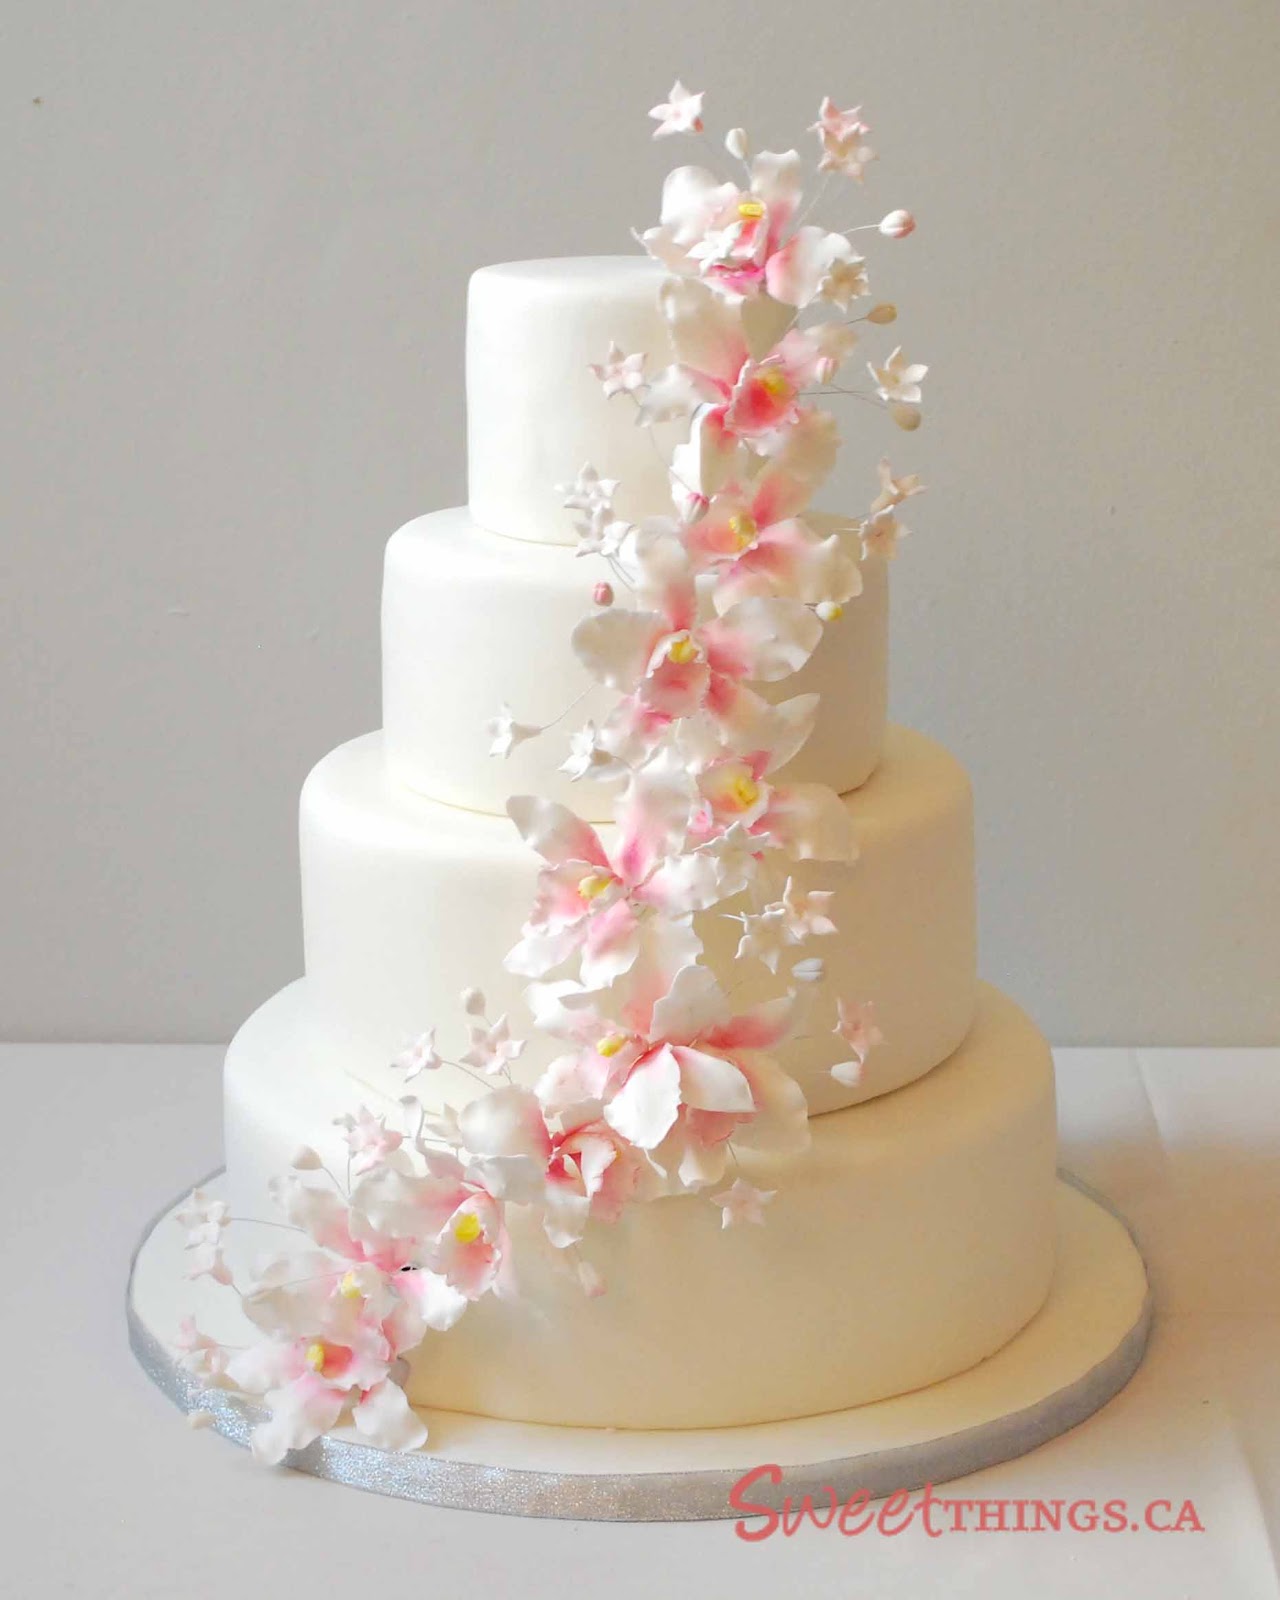 floral wedding cake images The flavors were chocolate sour cream cake with chocolate swiss 